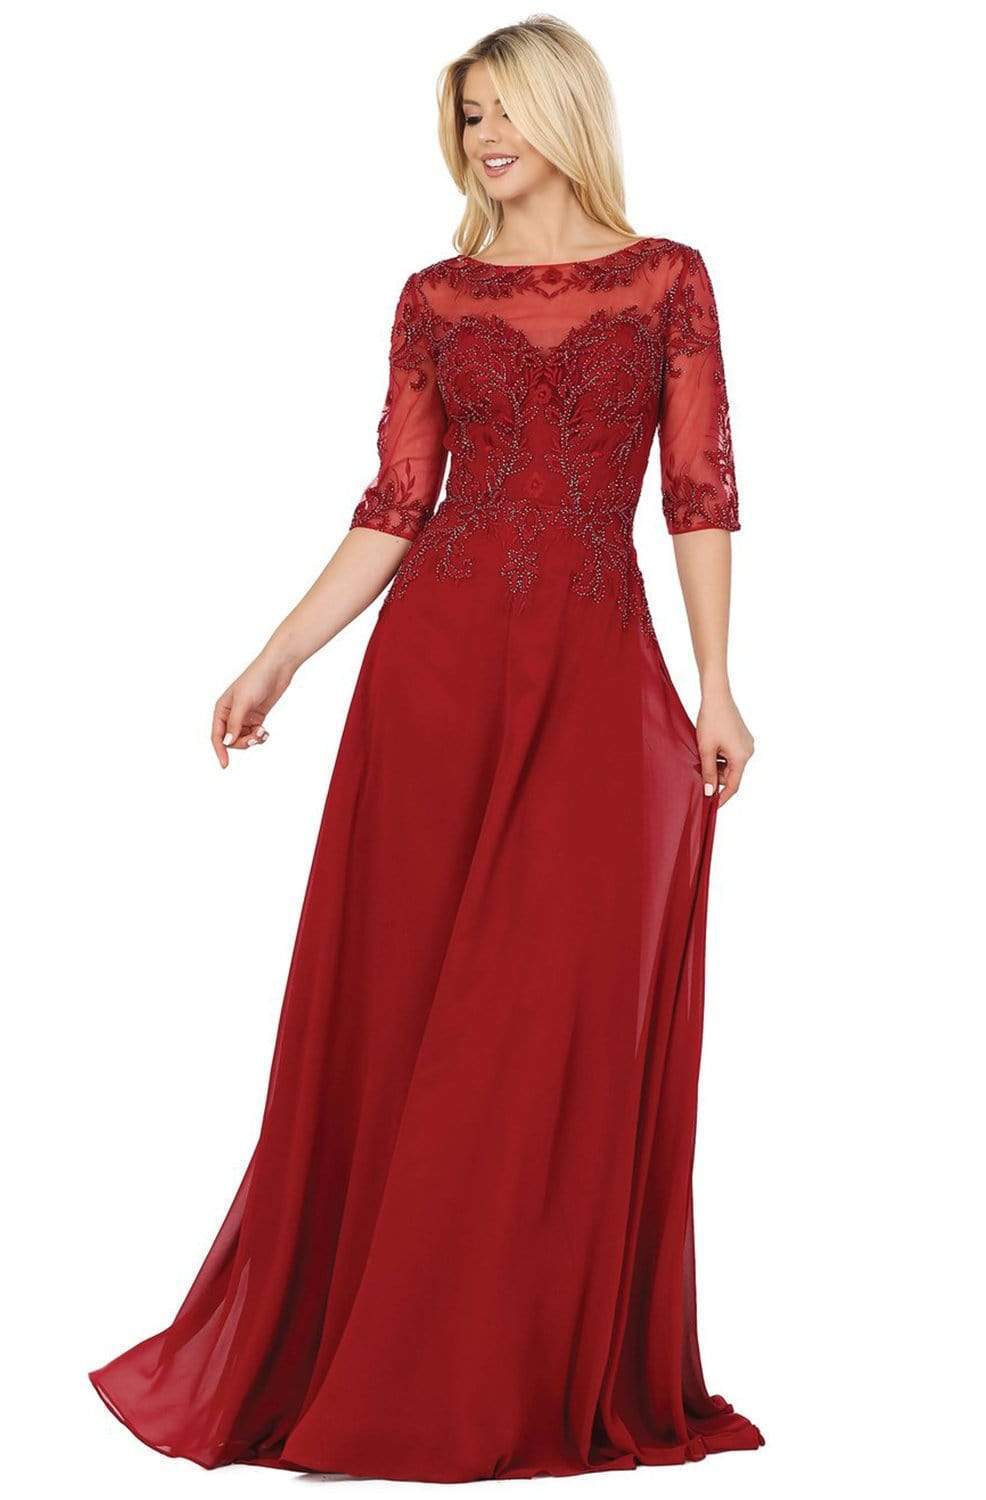 Dancing Queen - 2980 Embroidered Bateau A-line Dress